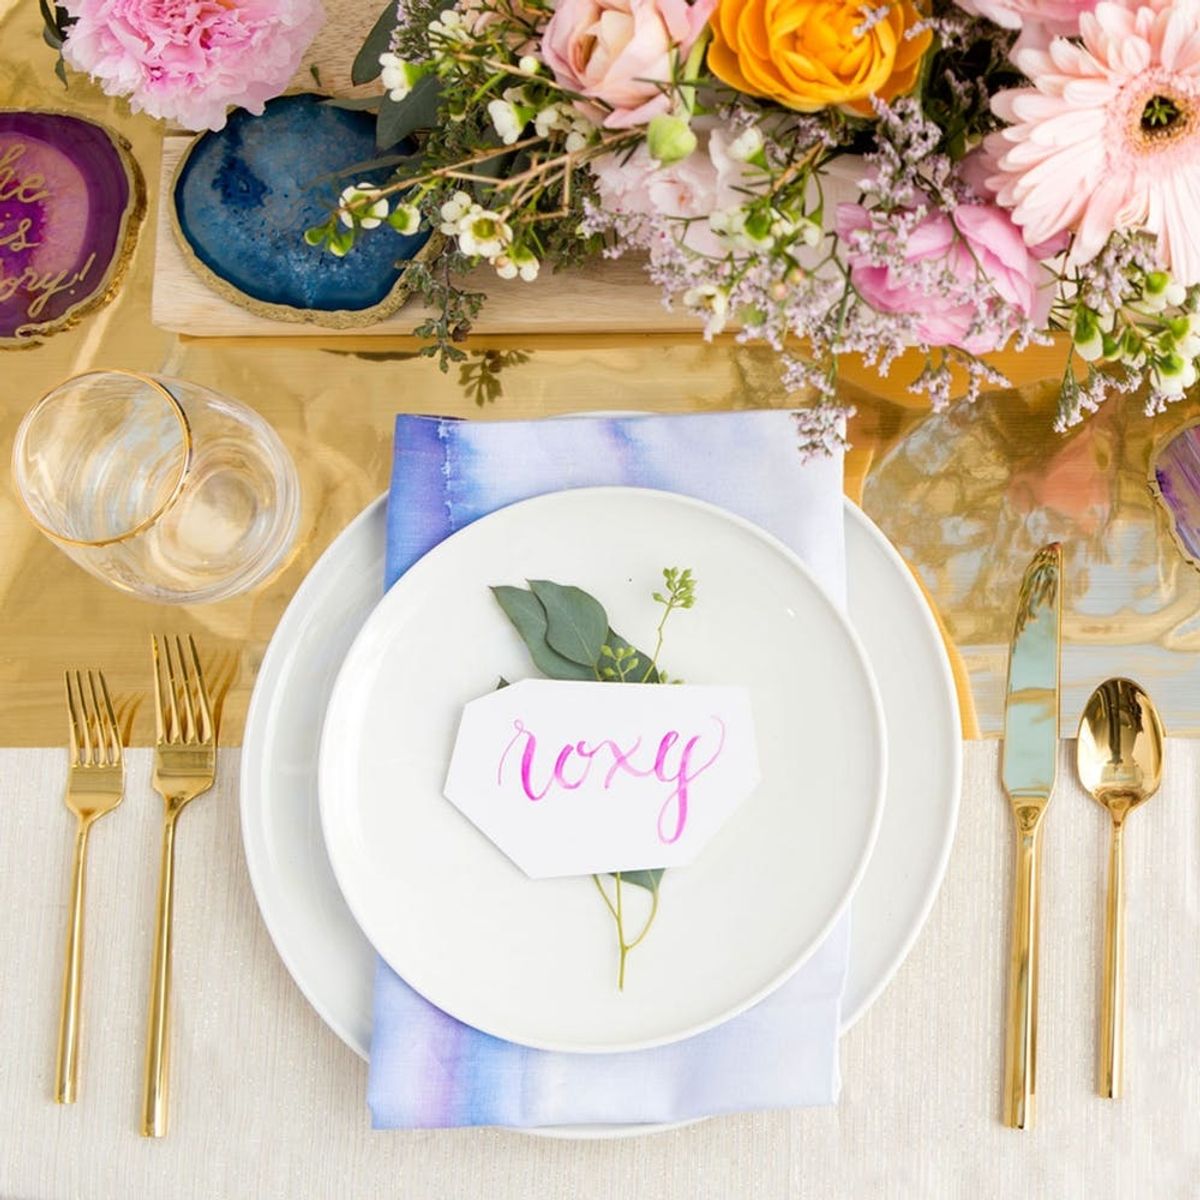 DIY Calligraphy Place Cards Your Wedding Guests Will Fall in Love With